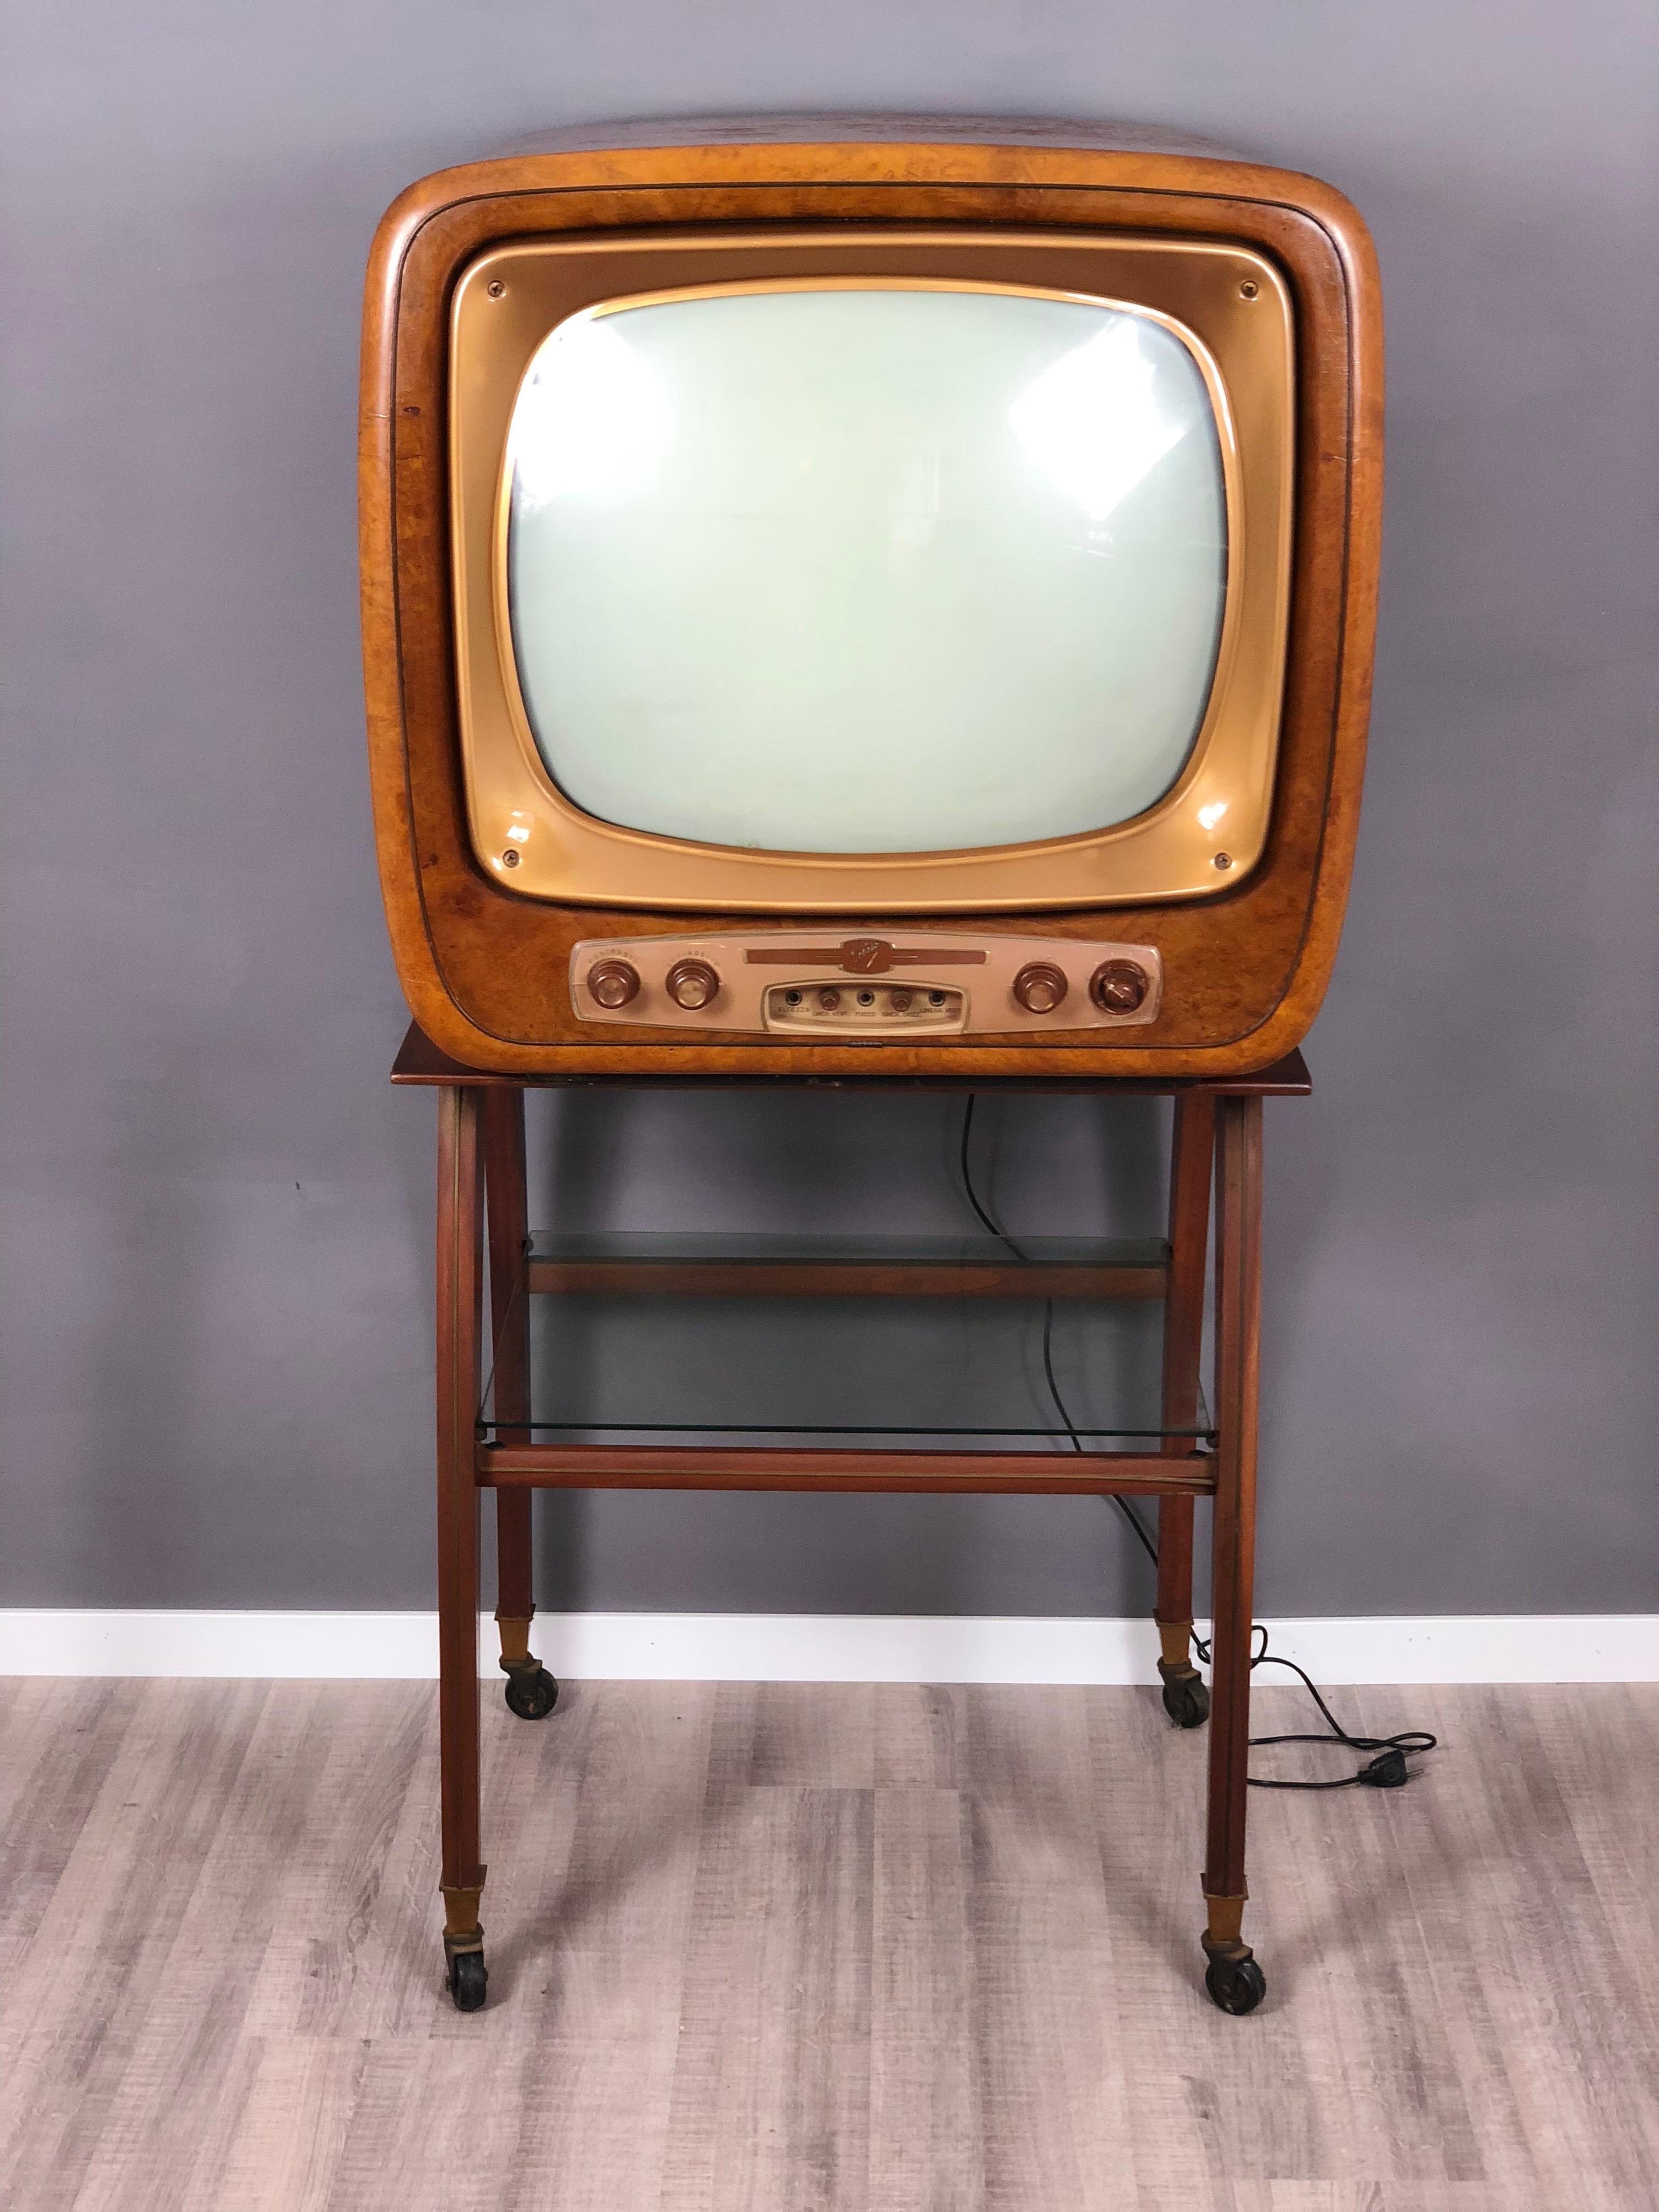 This GTV1014 was one of the first 21-inch b / w televisions produced by Geloso. 
It uses the intercarrier system as an audio-video medium frequency. The chassis is mounted inside the cabinet made of fine wood with beautiful briar-like veins. The 21